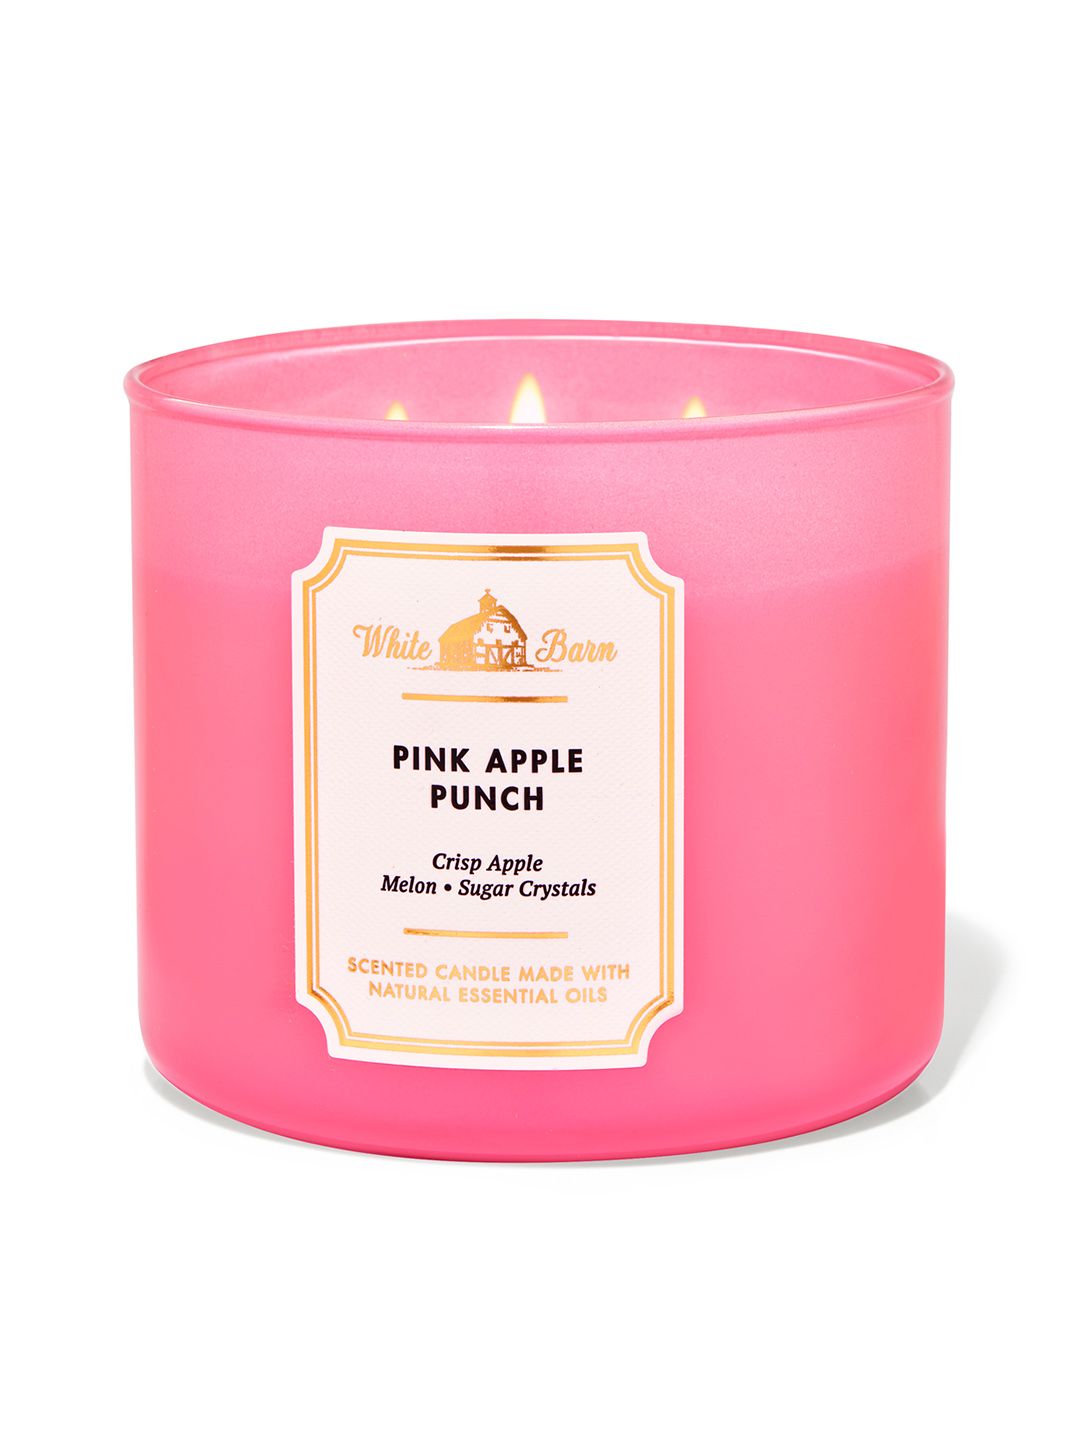 Bath & Body Works White Barn Pink Apple Punch 3-Wick Scented Candle - 411 g Price in India